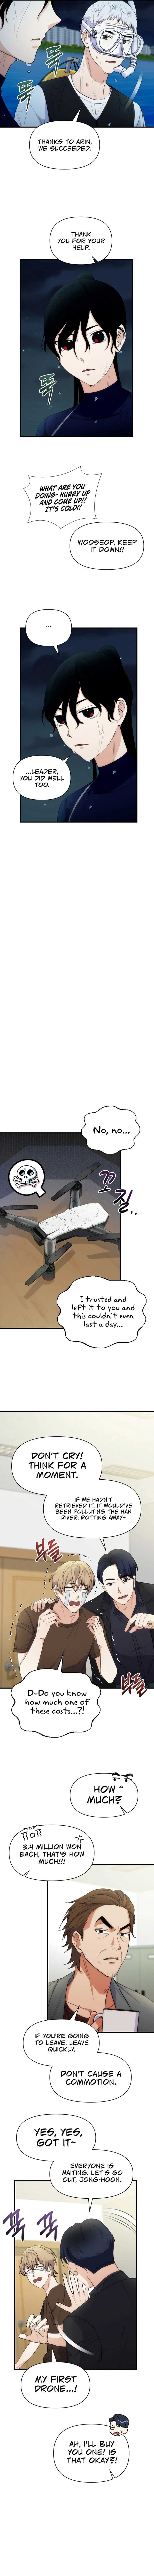 Seoul Exorcism Department Chapter 20 page 8